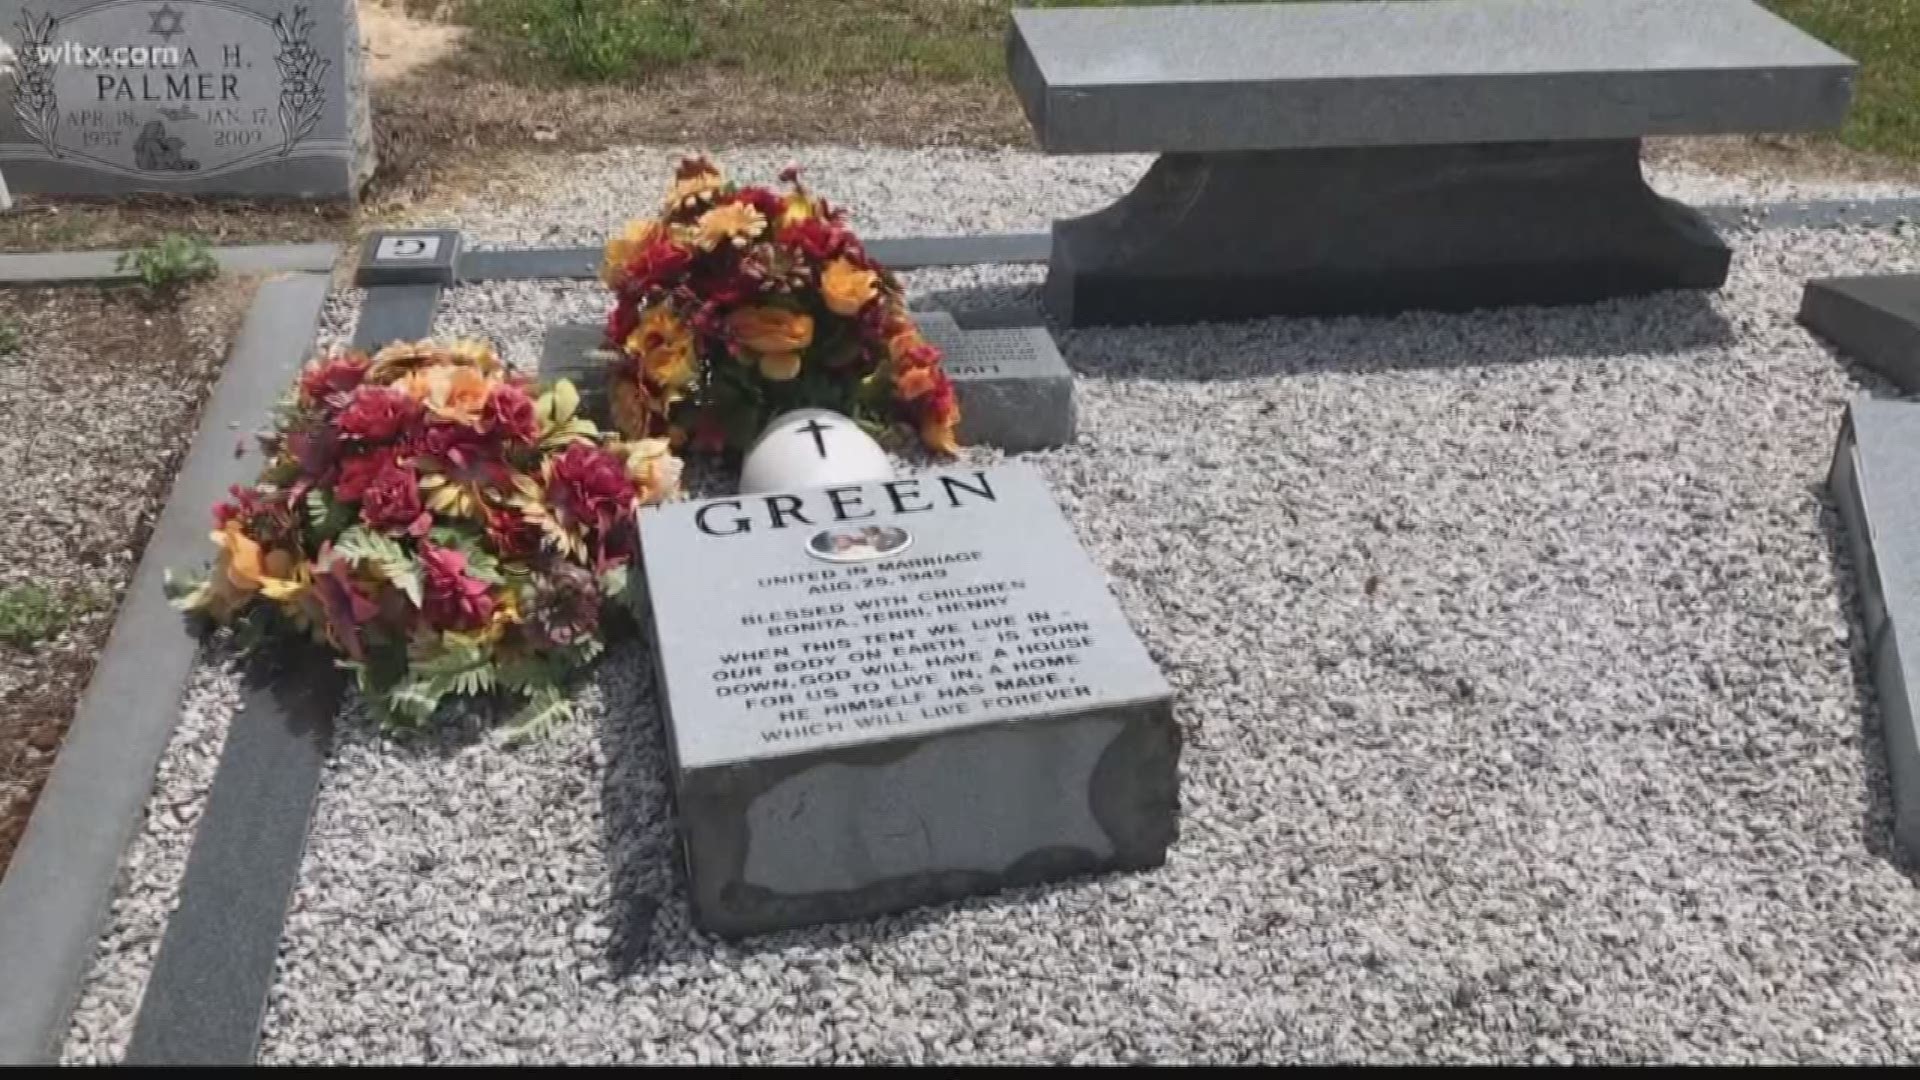 Vandals damaged graves and headstones in a Lexington Cemetery.